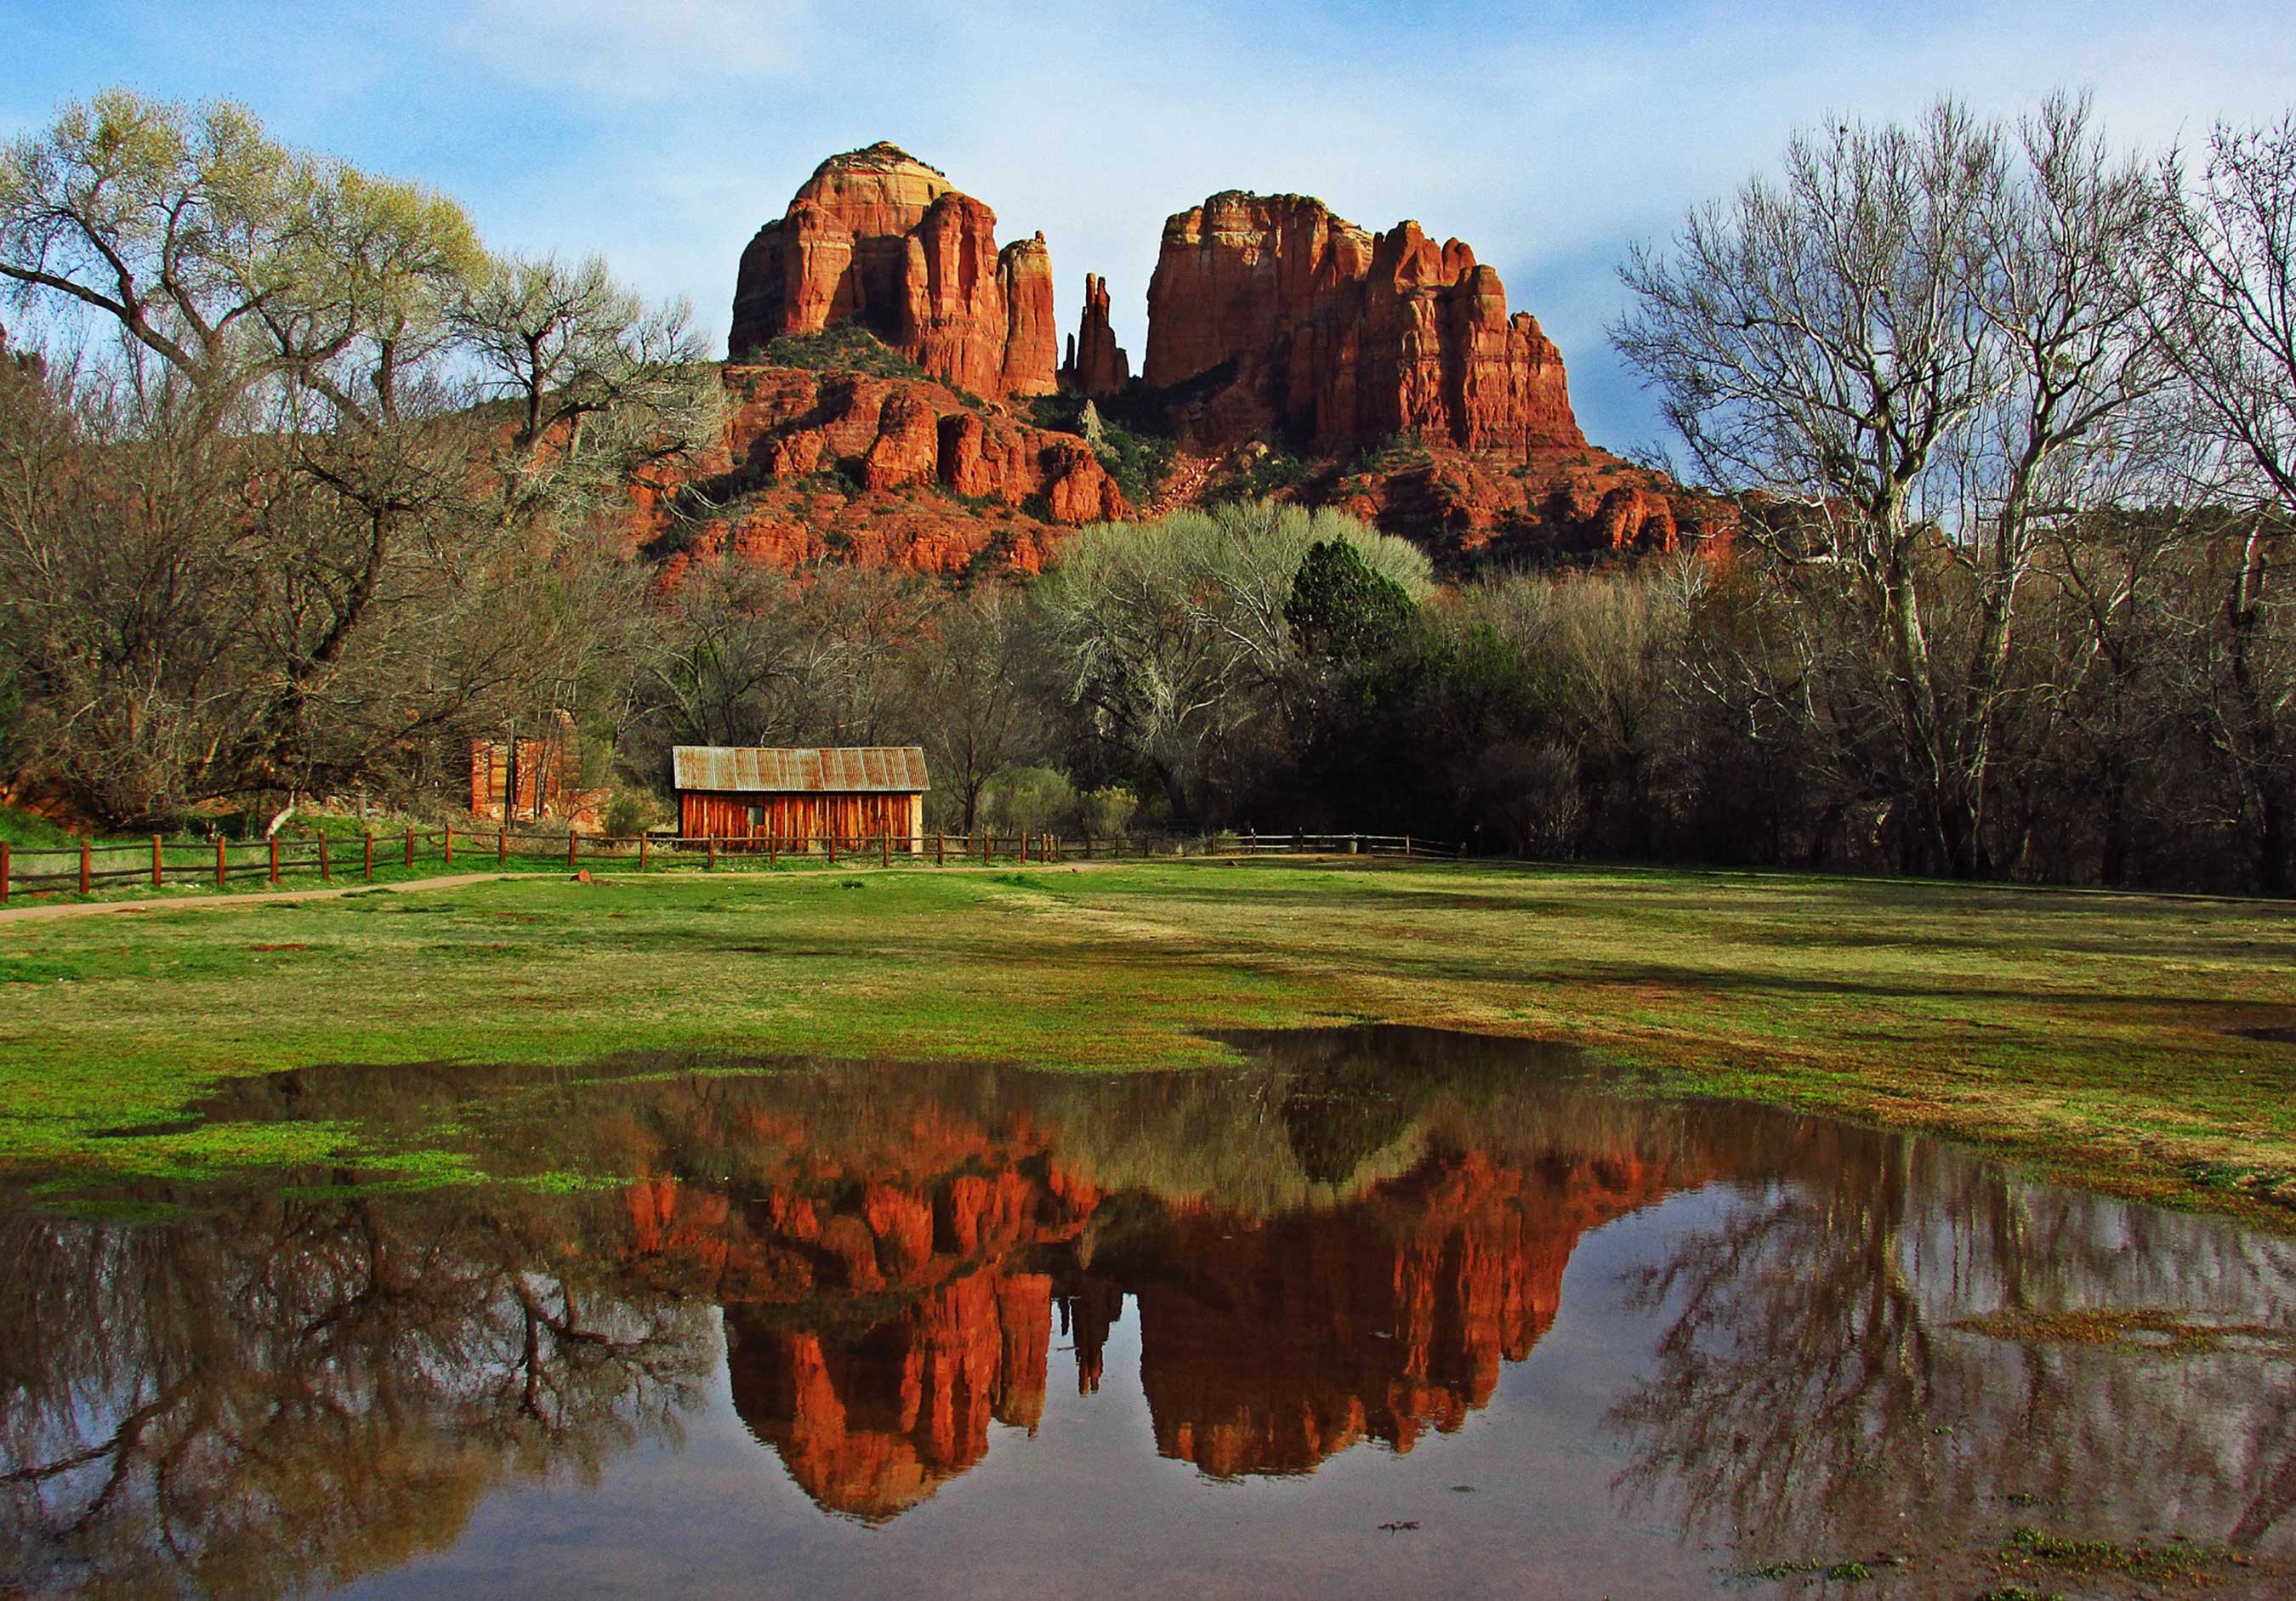 Share the Experience photo contest, Coconino National Forest in Arizona/Dorrie Henderson